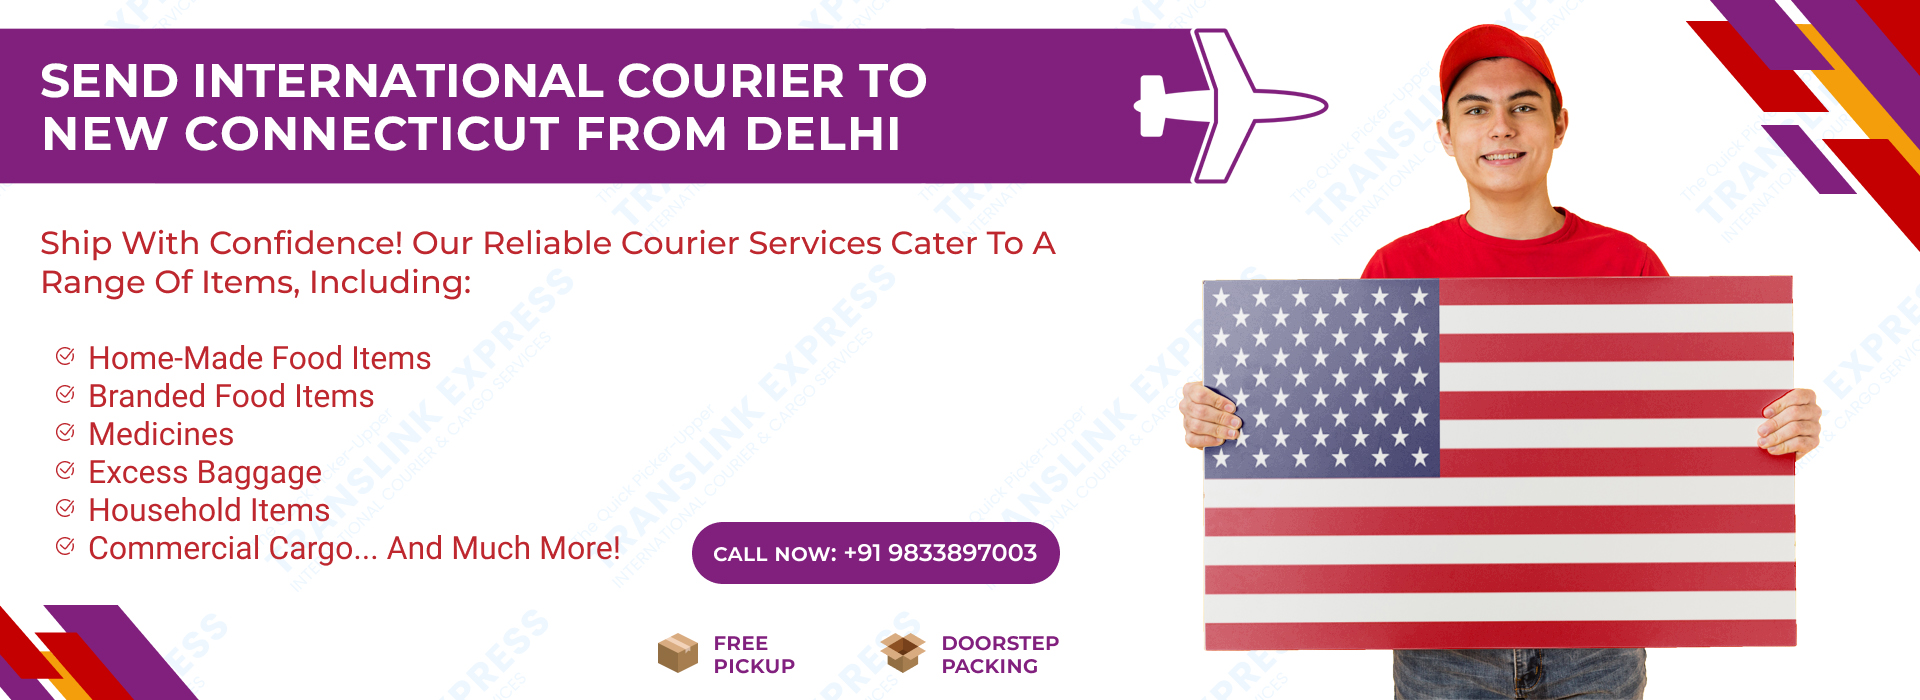 Courier to New Connecticut From Delhi